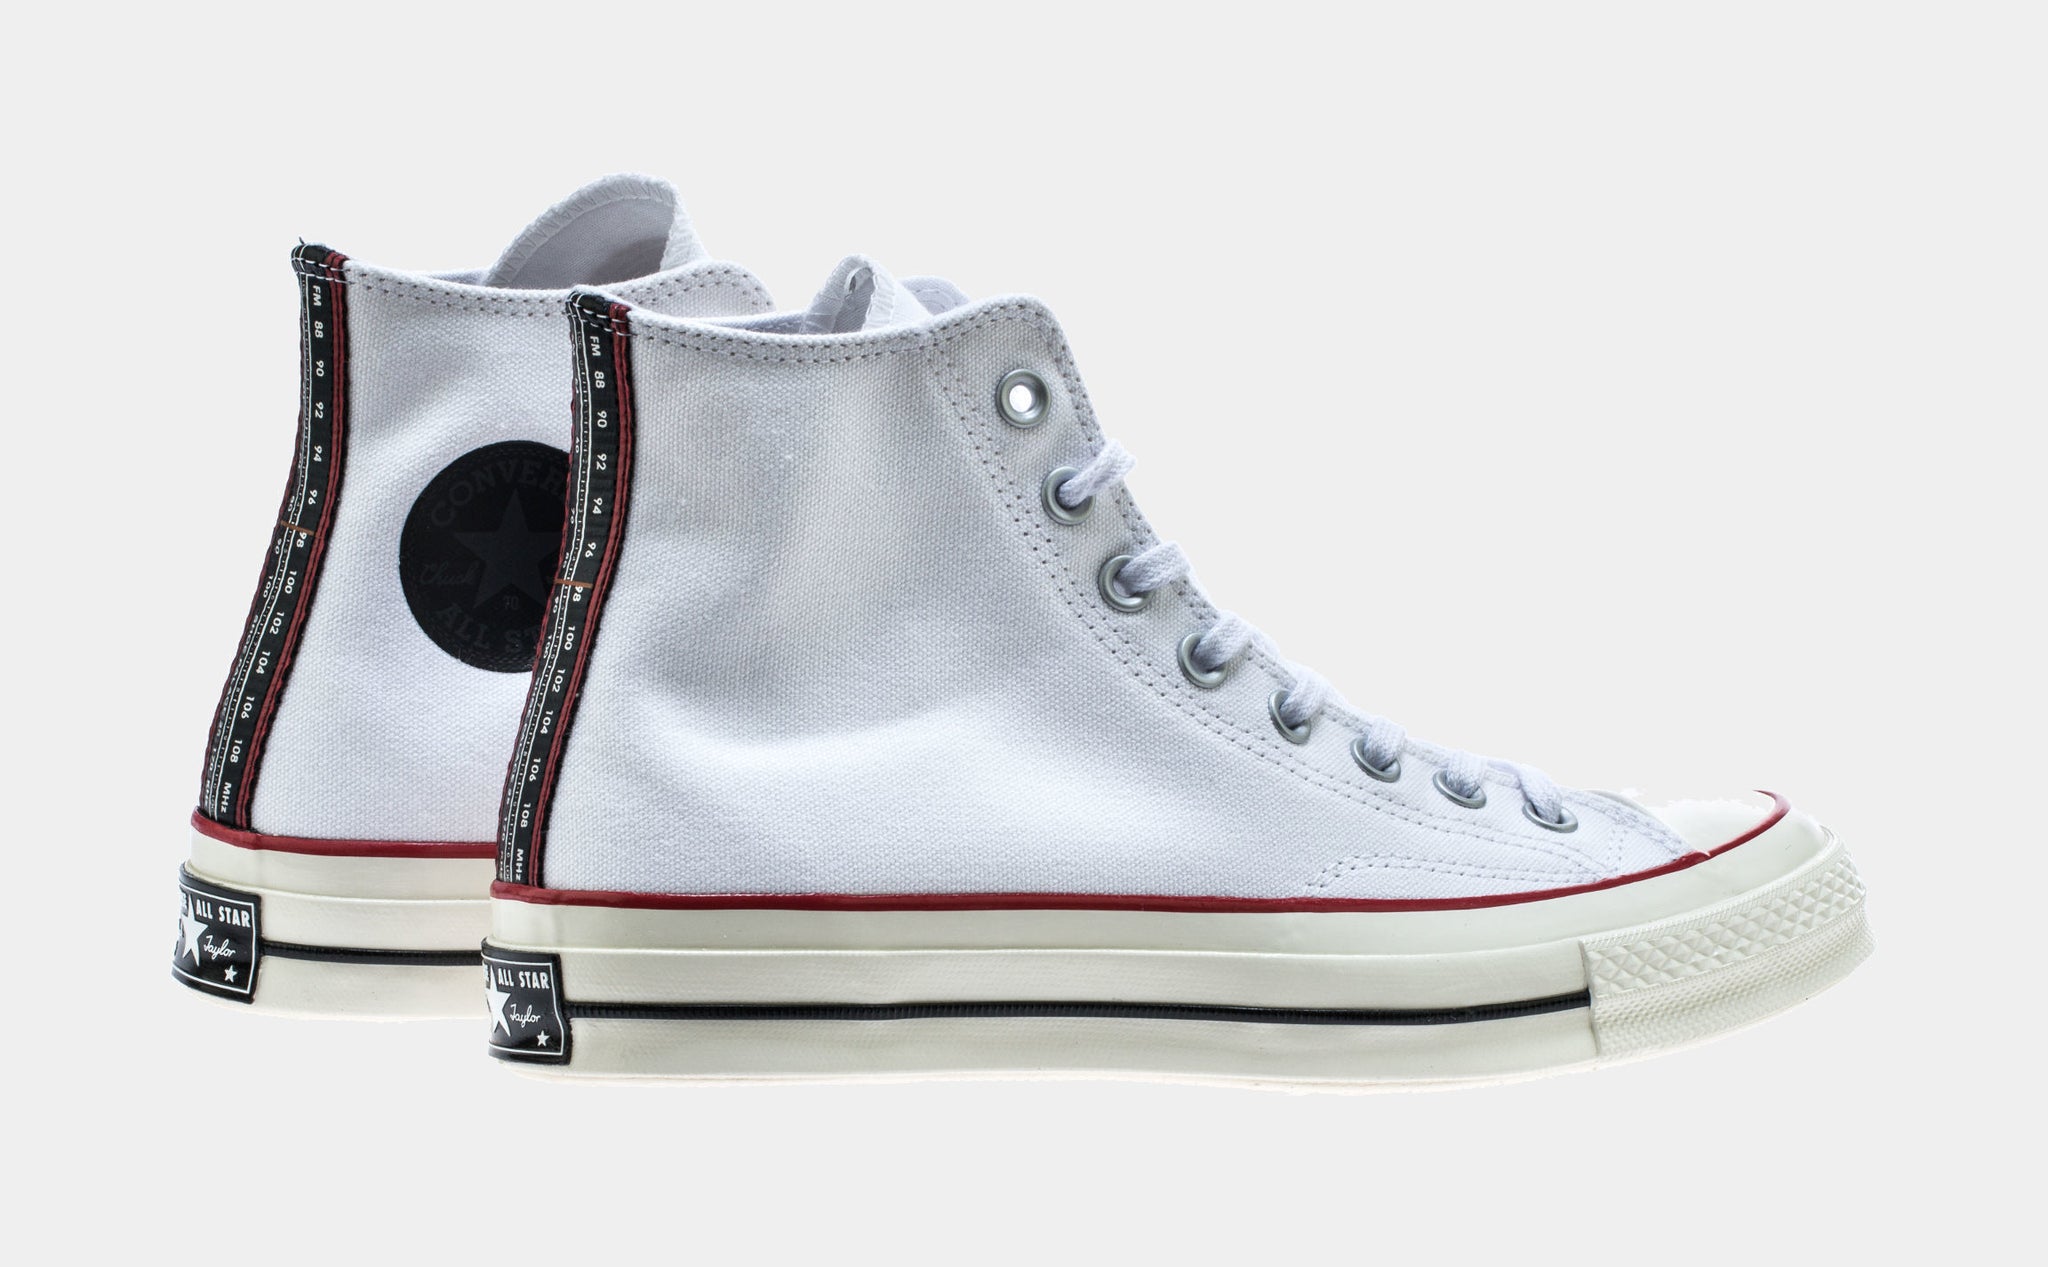 Shoe Palace X Converse Chuck Taylor All Star 70 HI Mens Lifestyle Shoe  (White) Free Shipping